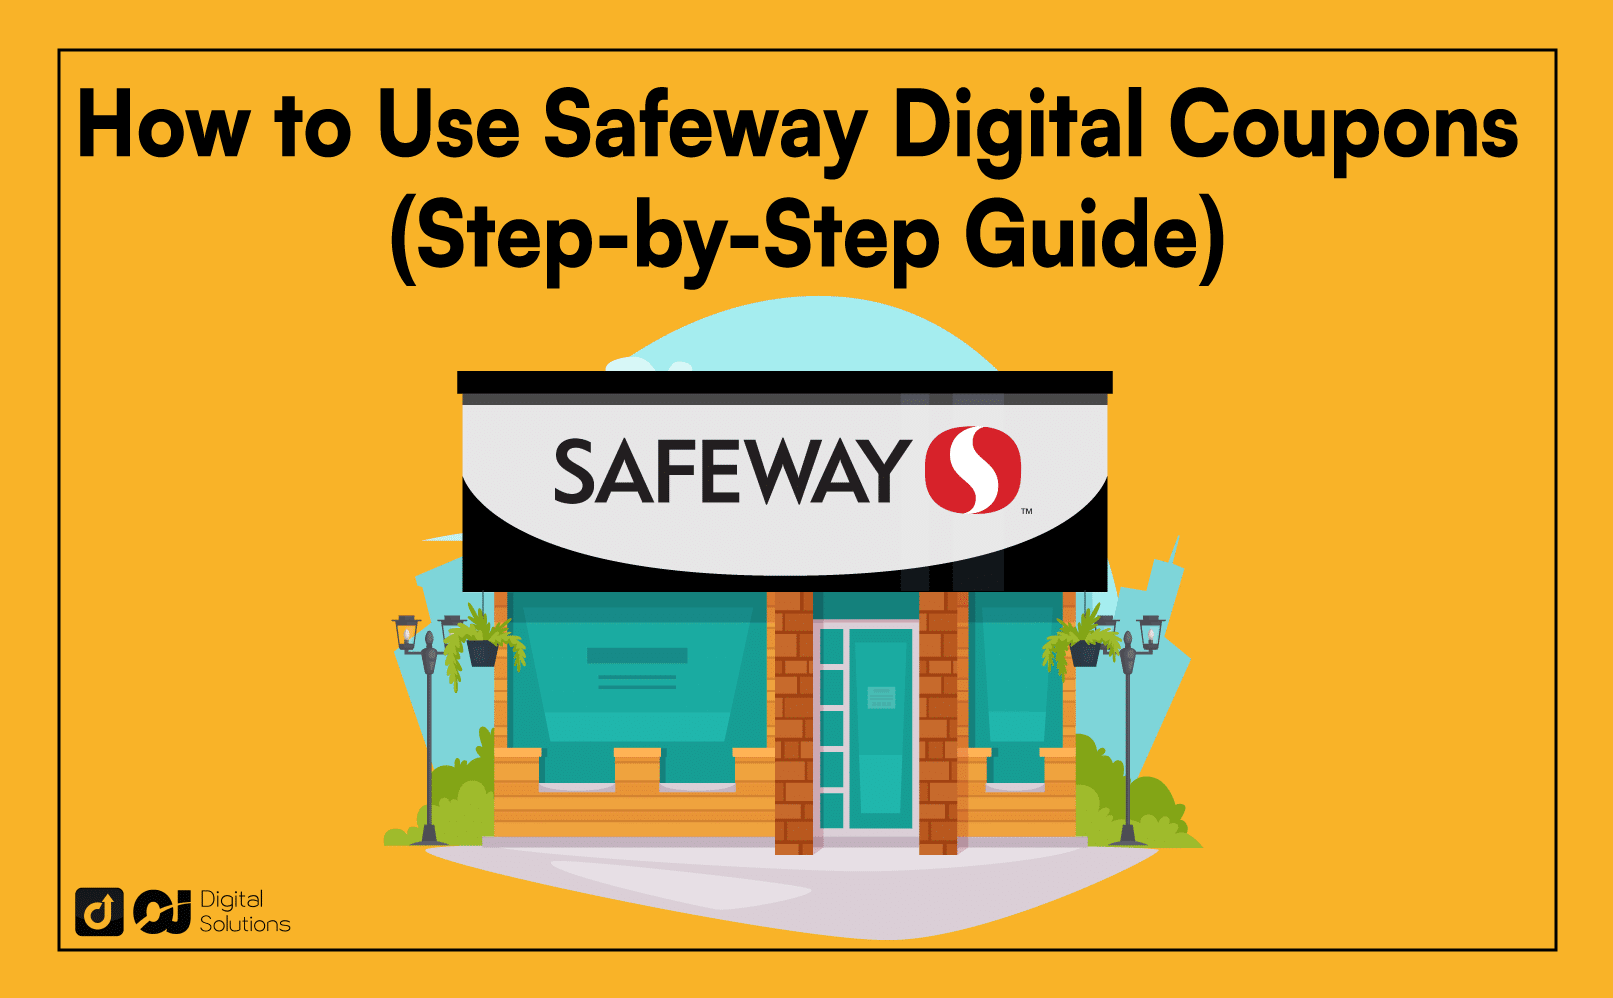 How To Use Safeway Digital Coupons for Maximum Savings